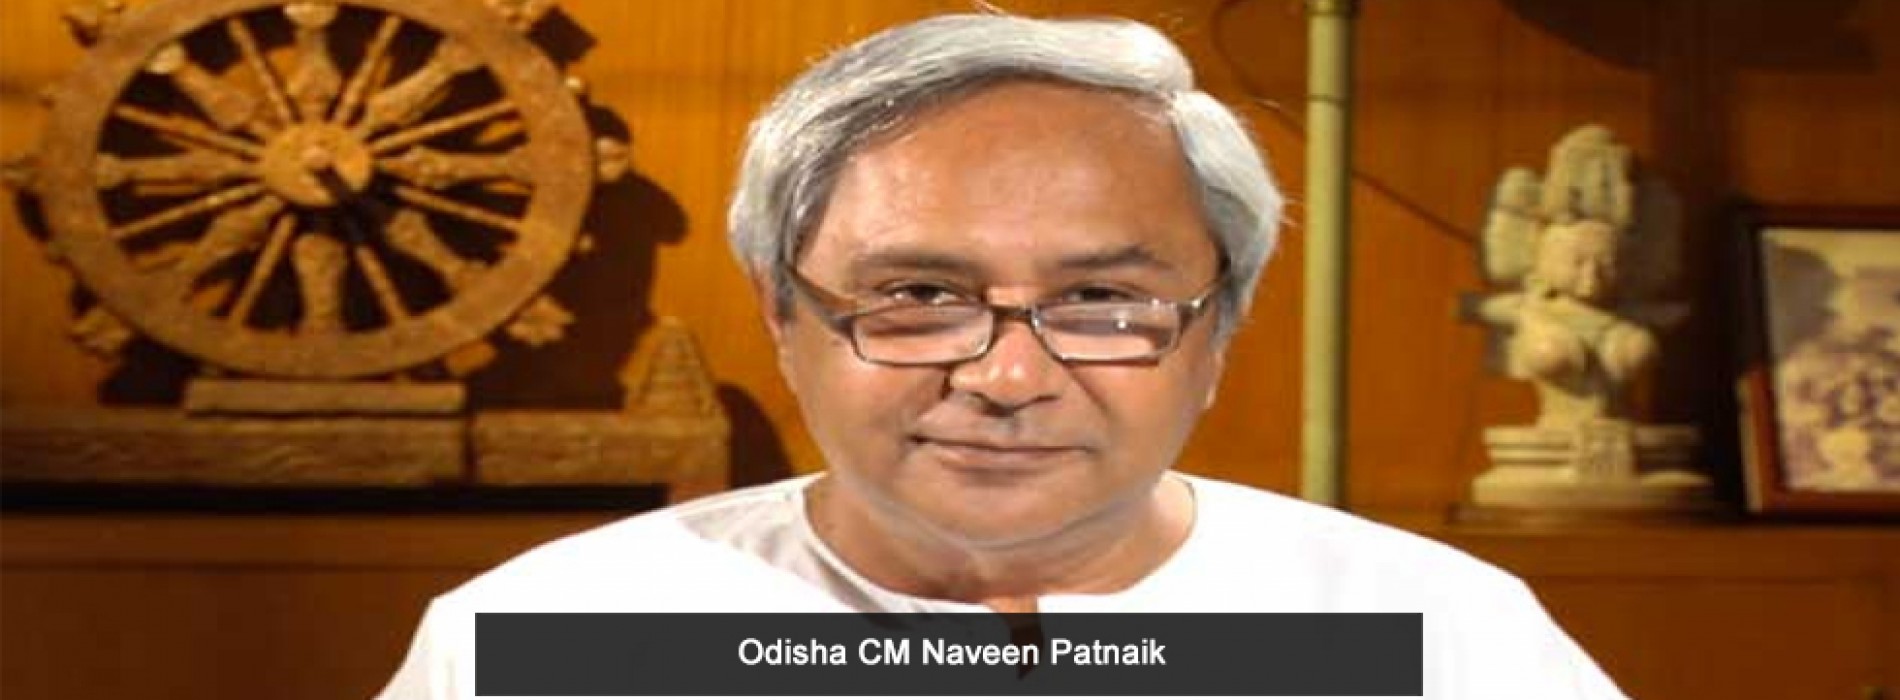 Odisha places Rs 6,500 crore proposal in rail budget